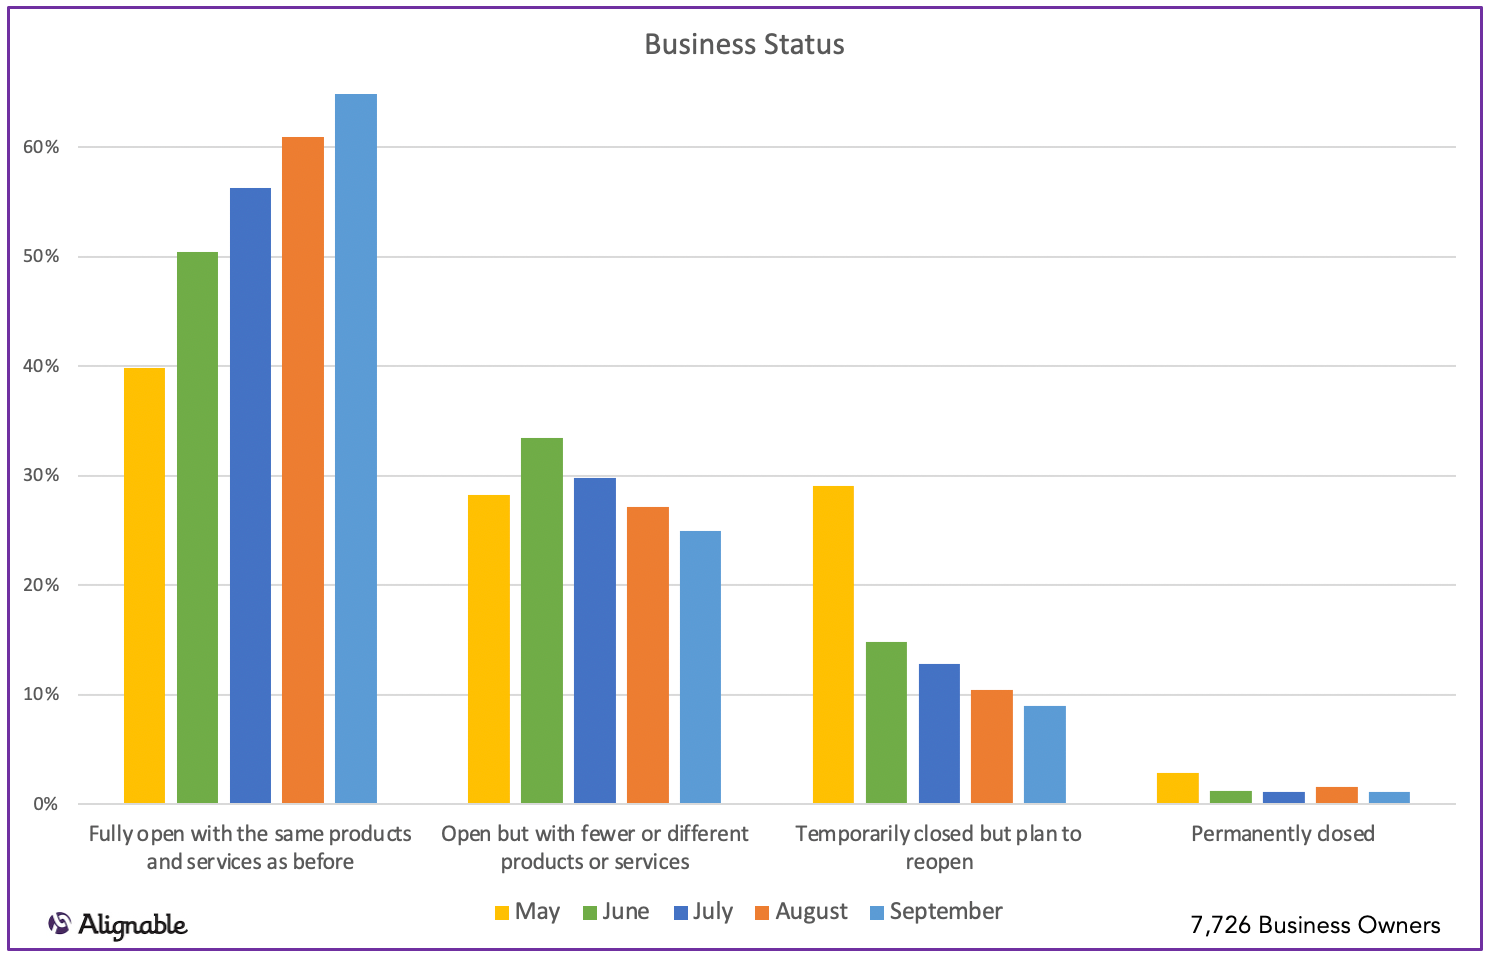 Business Open Status by Month